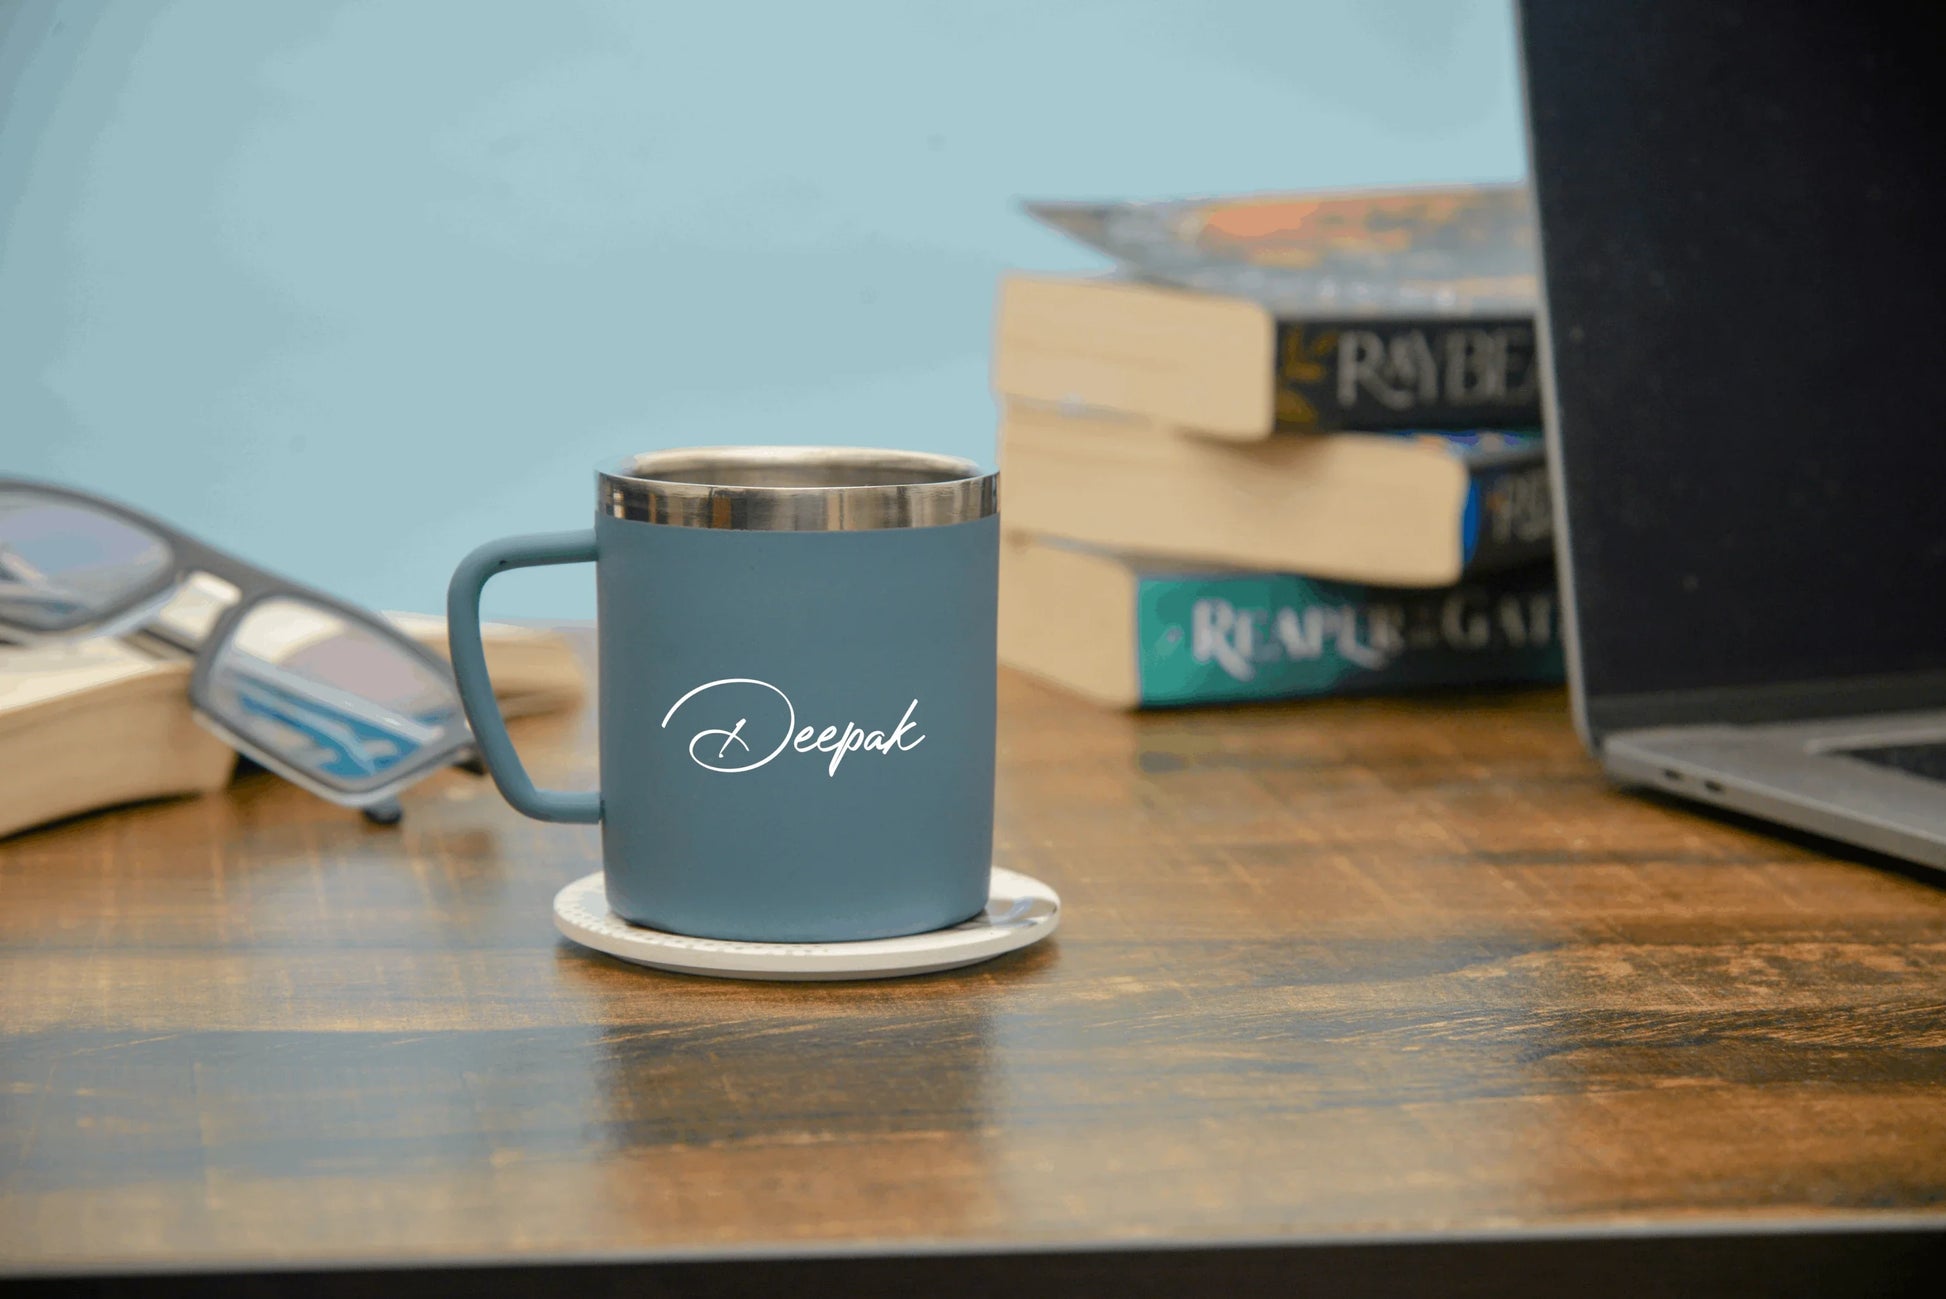 Made from high quality stainless steel and environmental friendly metal, this mug is the perfect fusion of style, fashion and durability